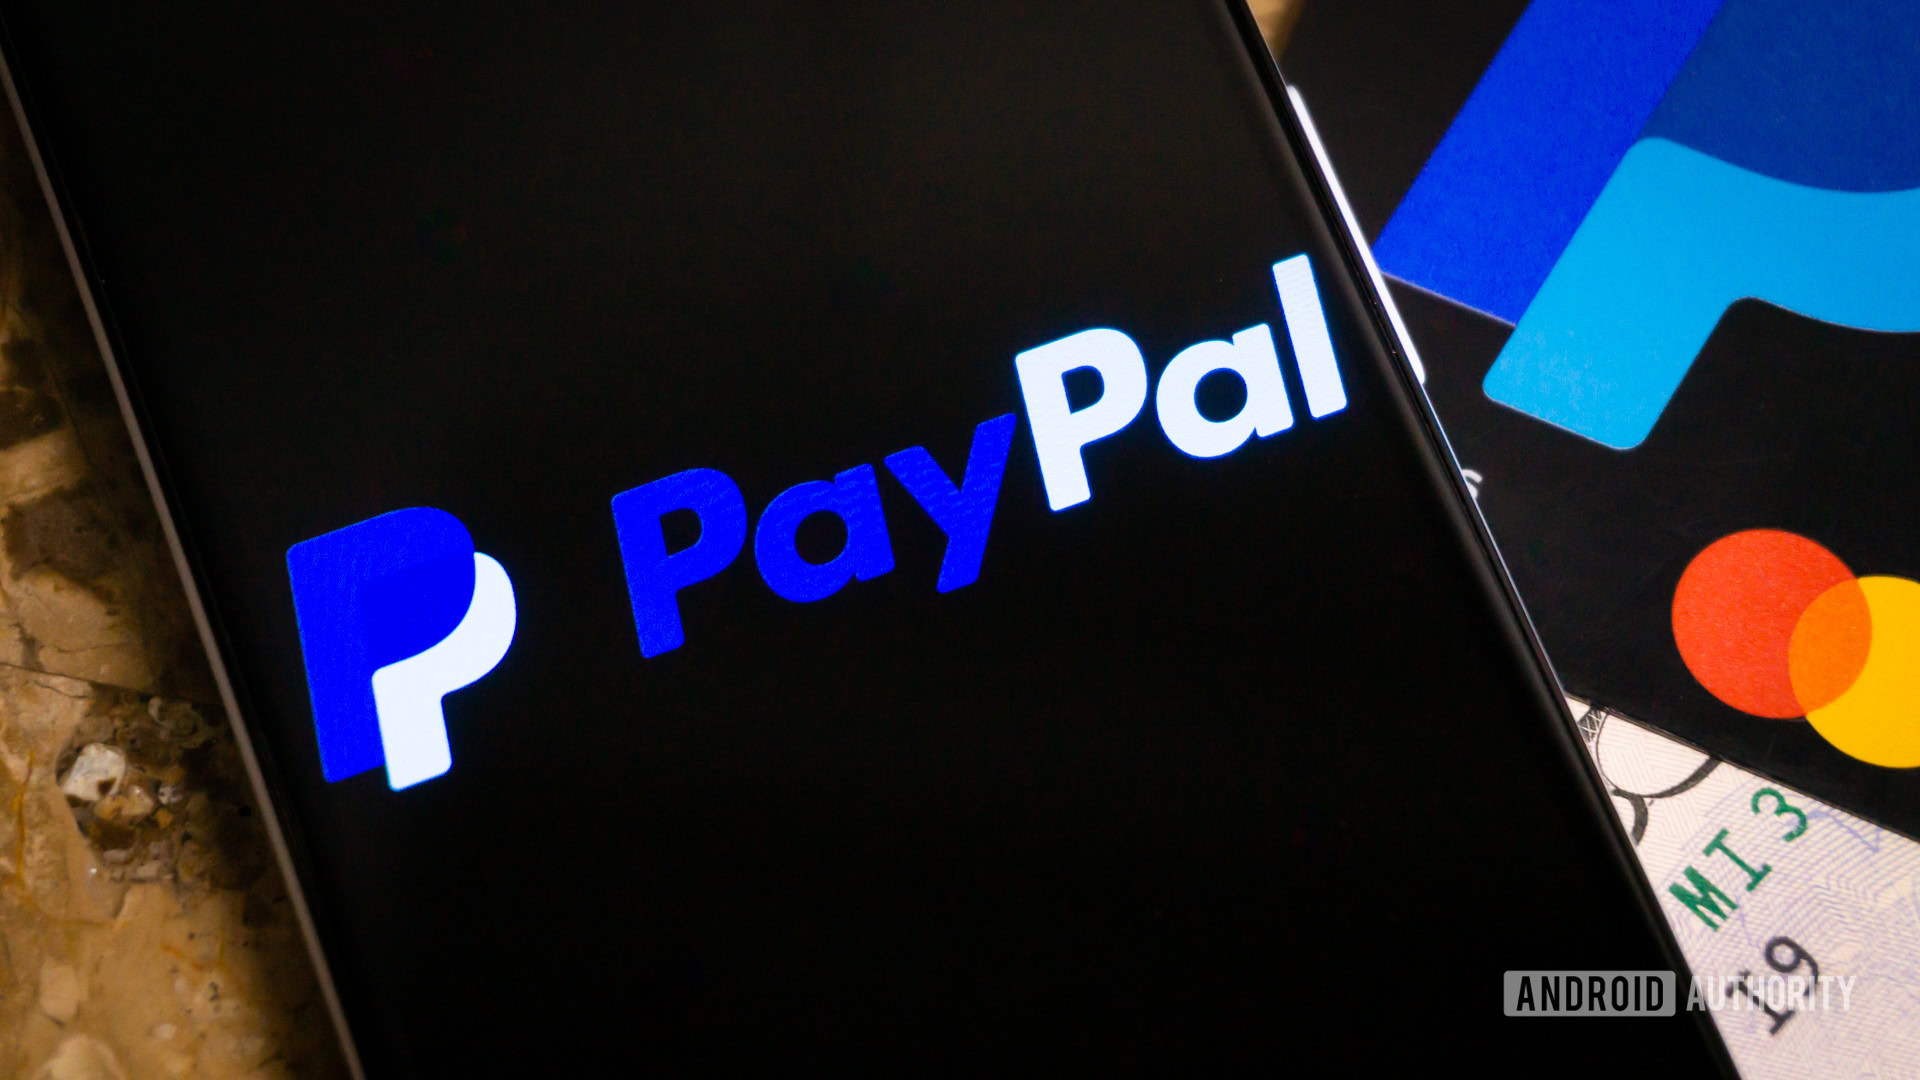 Paypal Photos Download The BEST Free Paypal Stock Photos  HD Images